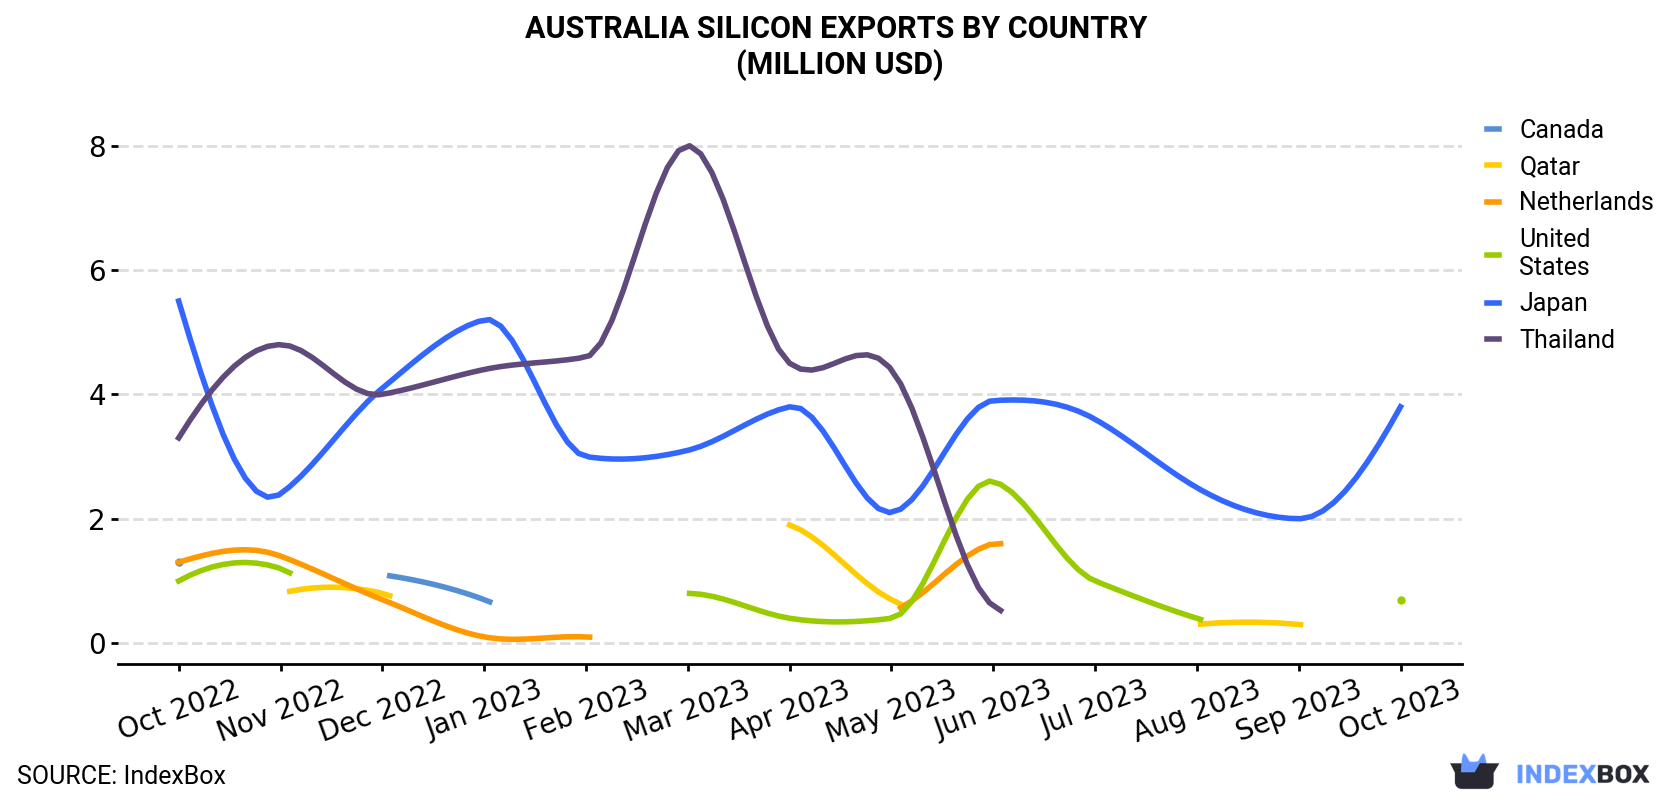 Australia Silicon Exports By Country (Million USD)